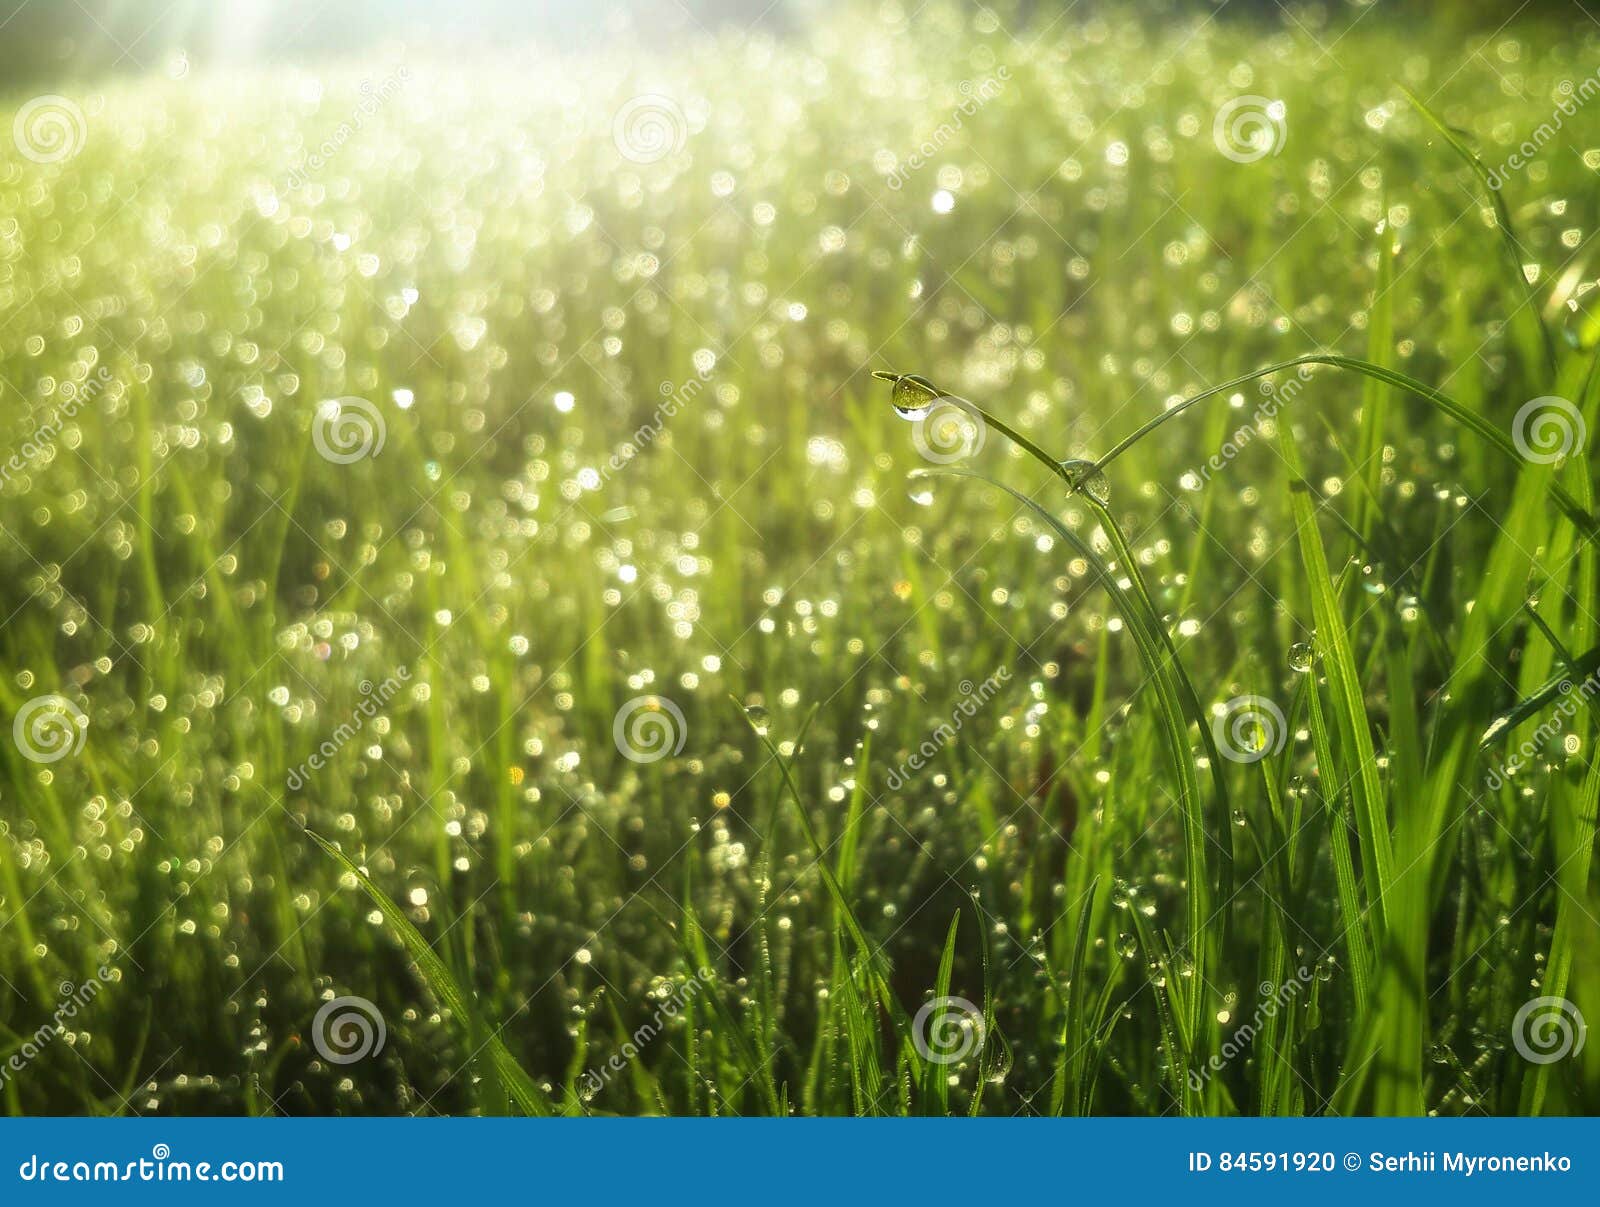 water drops at the greem grass under sun rays